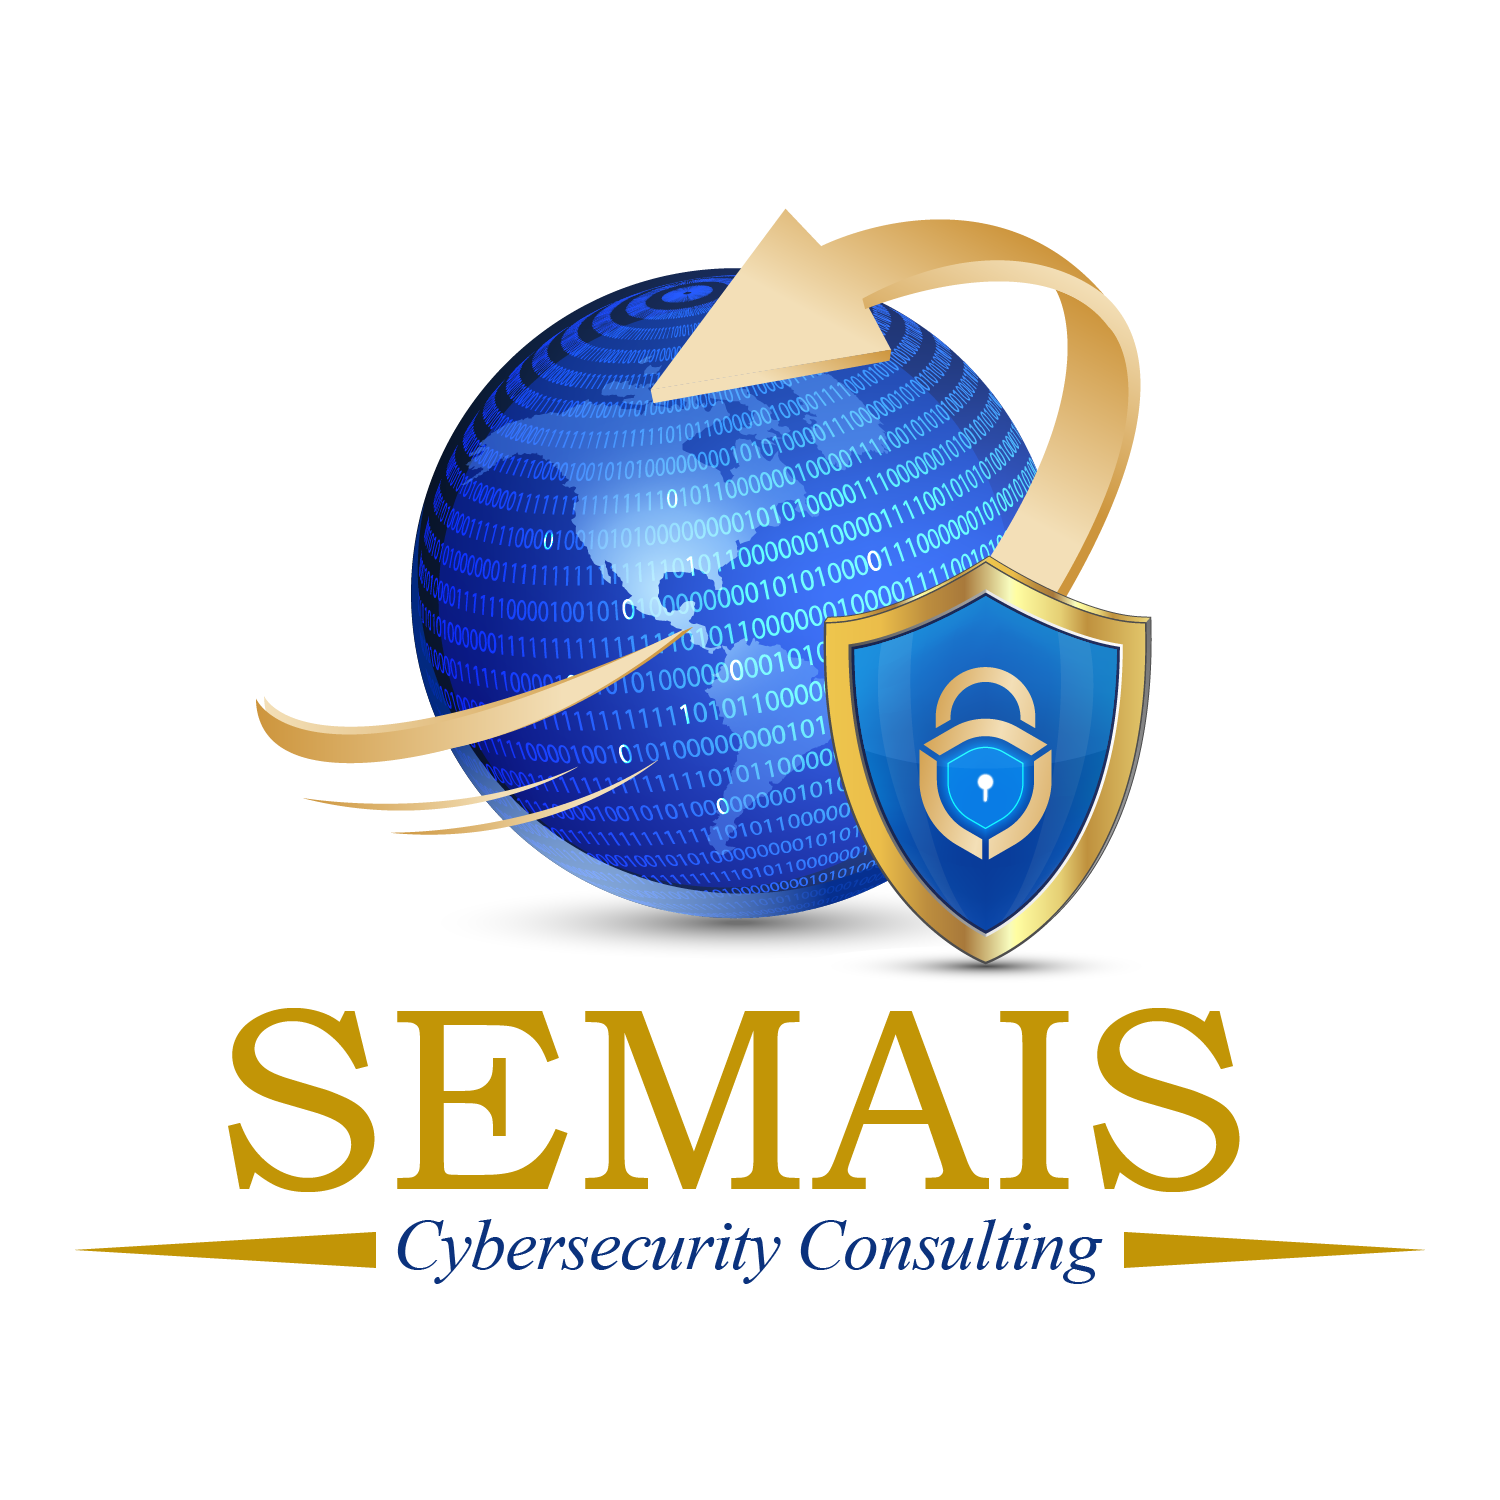 More courses from Secure Managed Instructional Systems (SEMAIS)